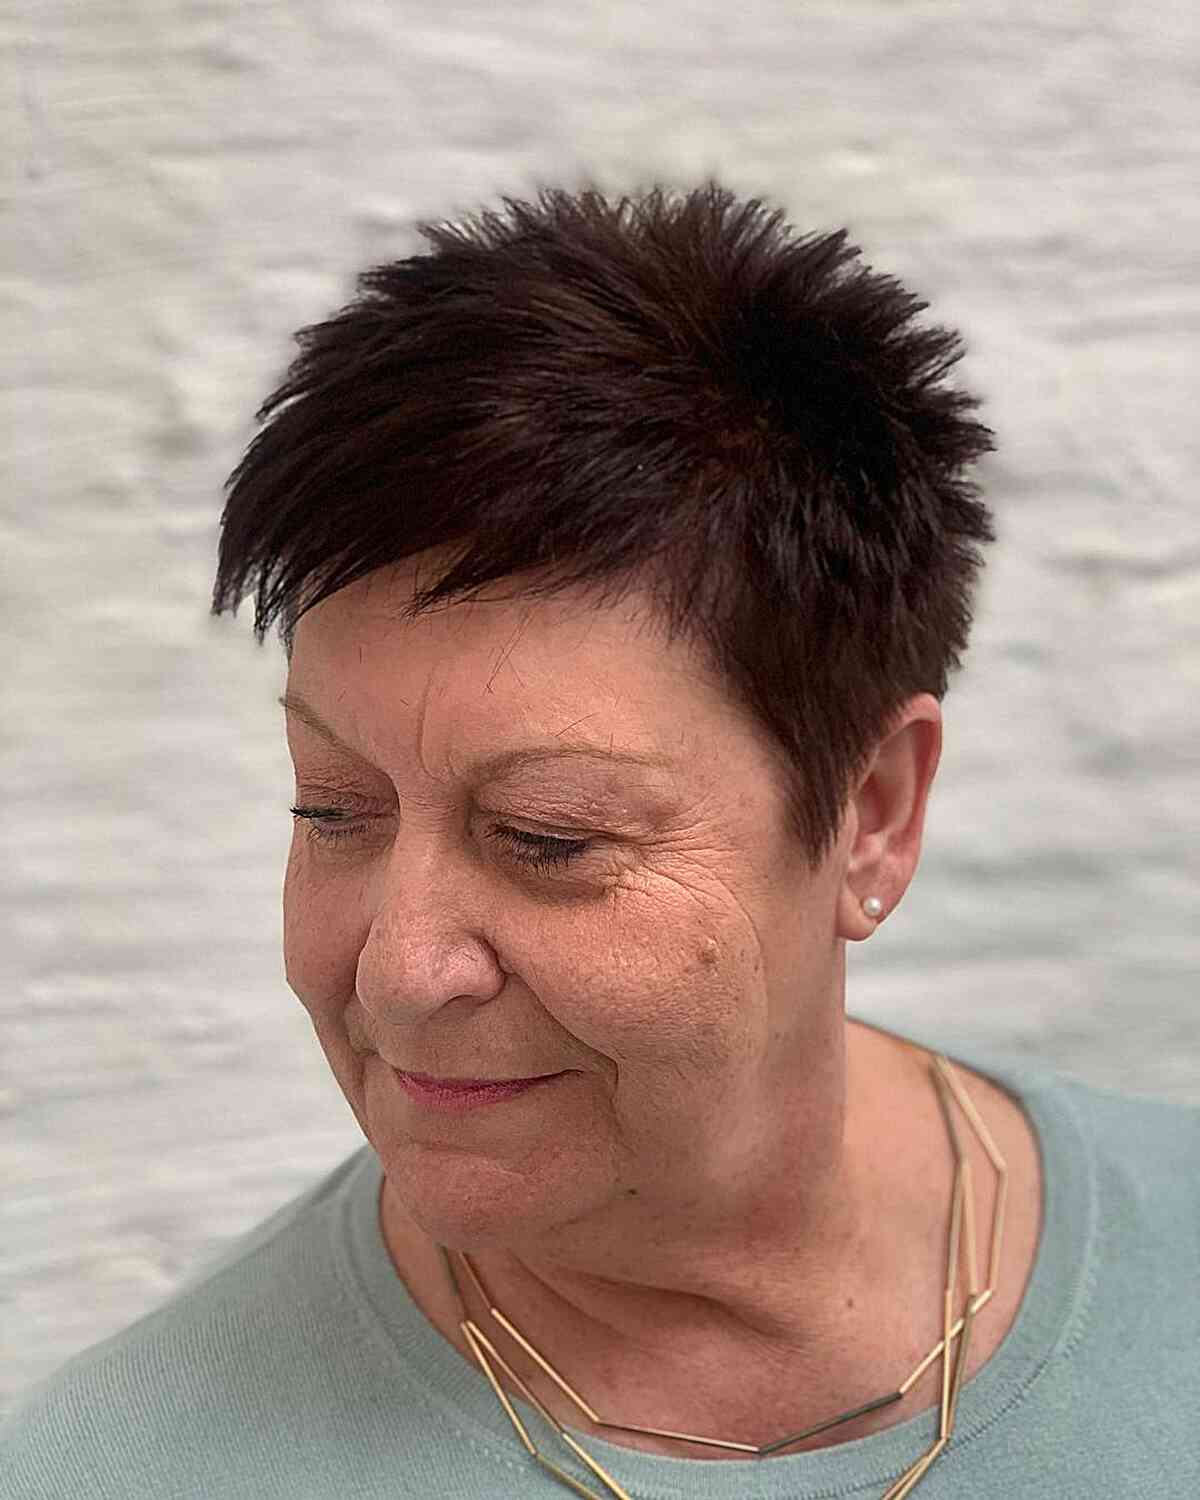 Short Spikiest Pixie Cut for older women with thin, colored hair